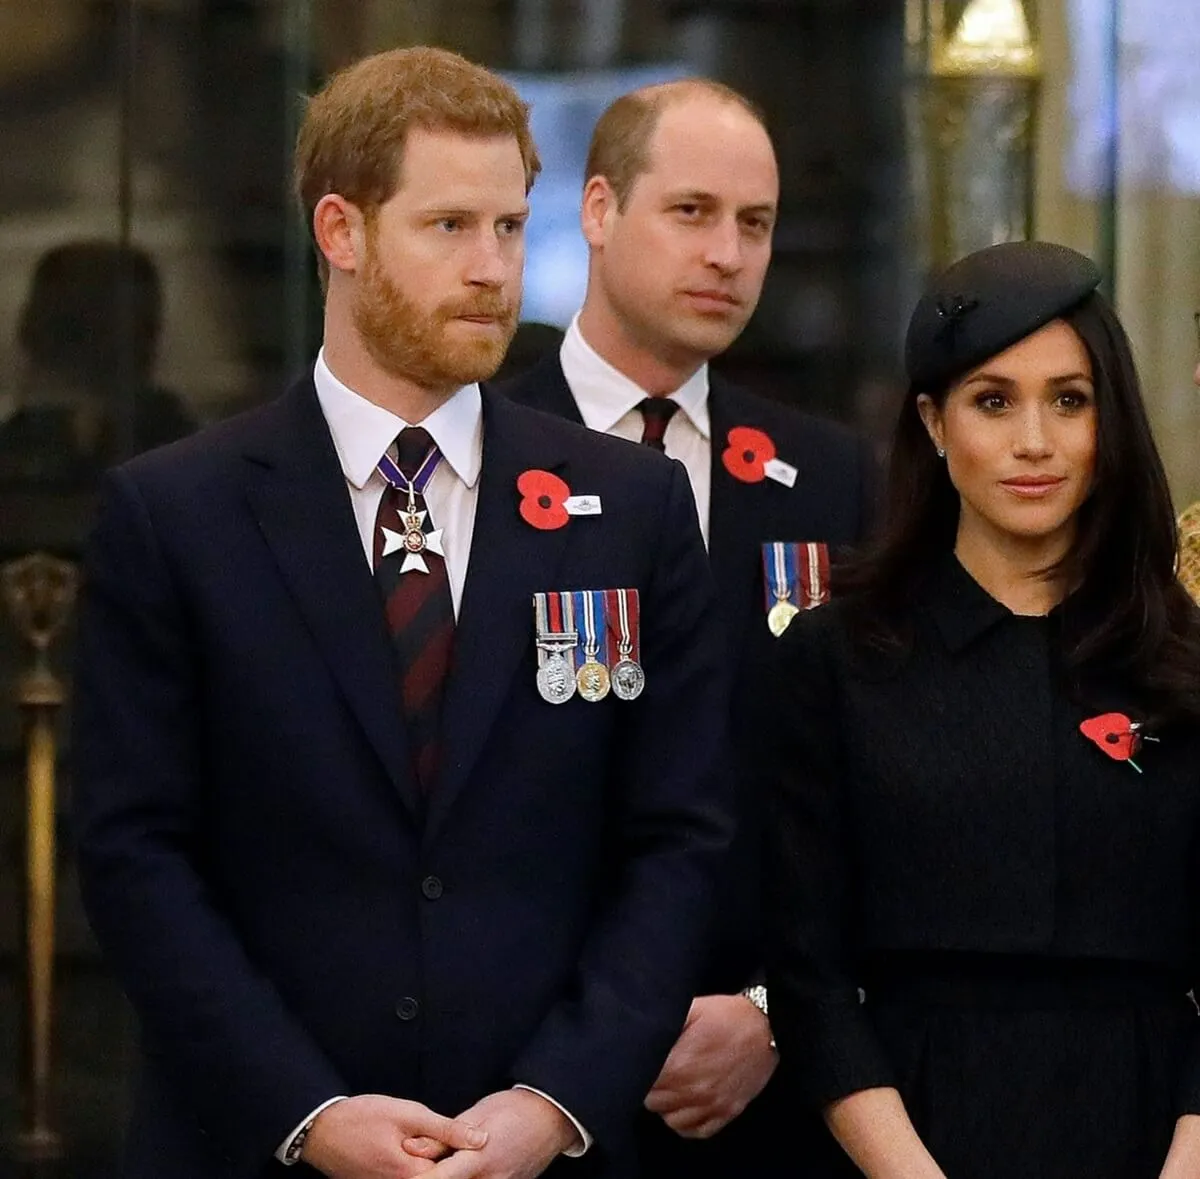 Prince Harry, Prince William, and Meghan Markle attend attend an Anzac Day at Westminster Abbey